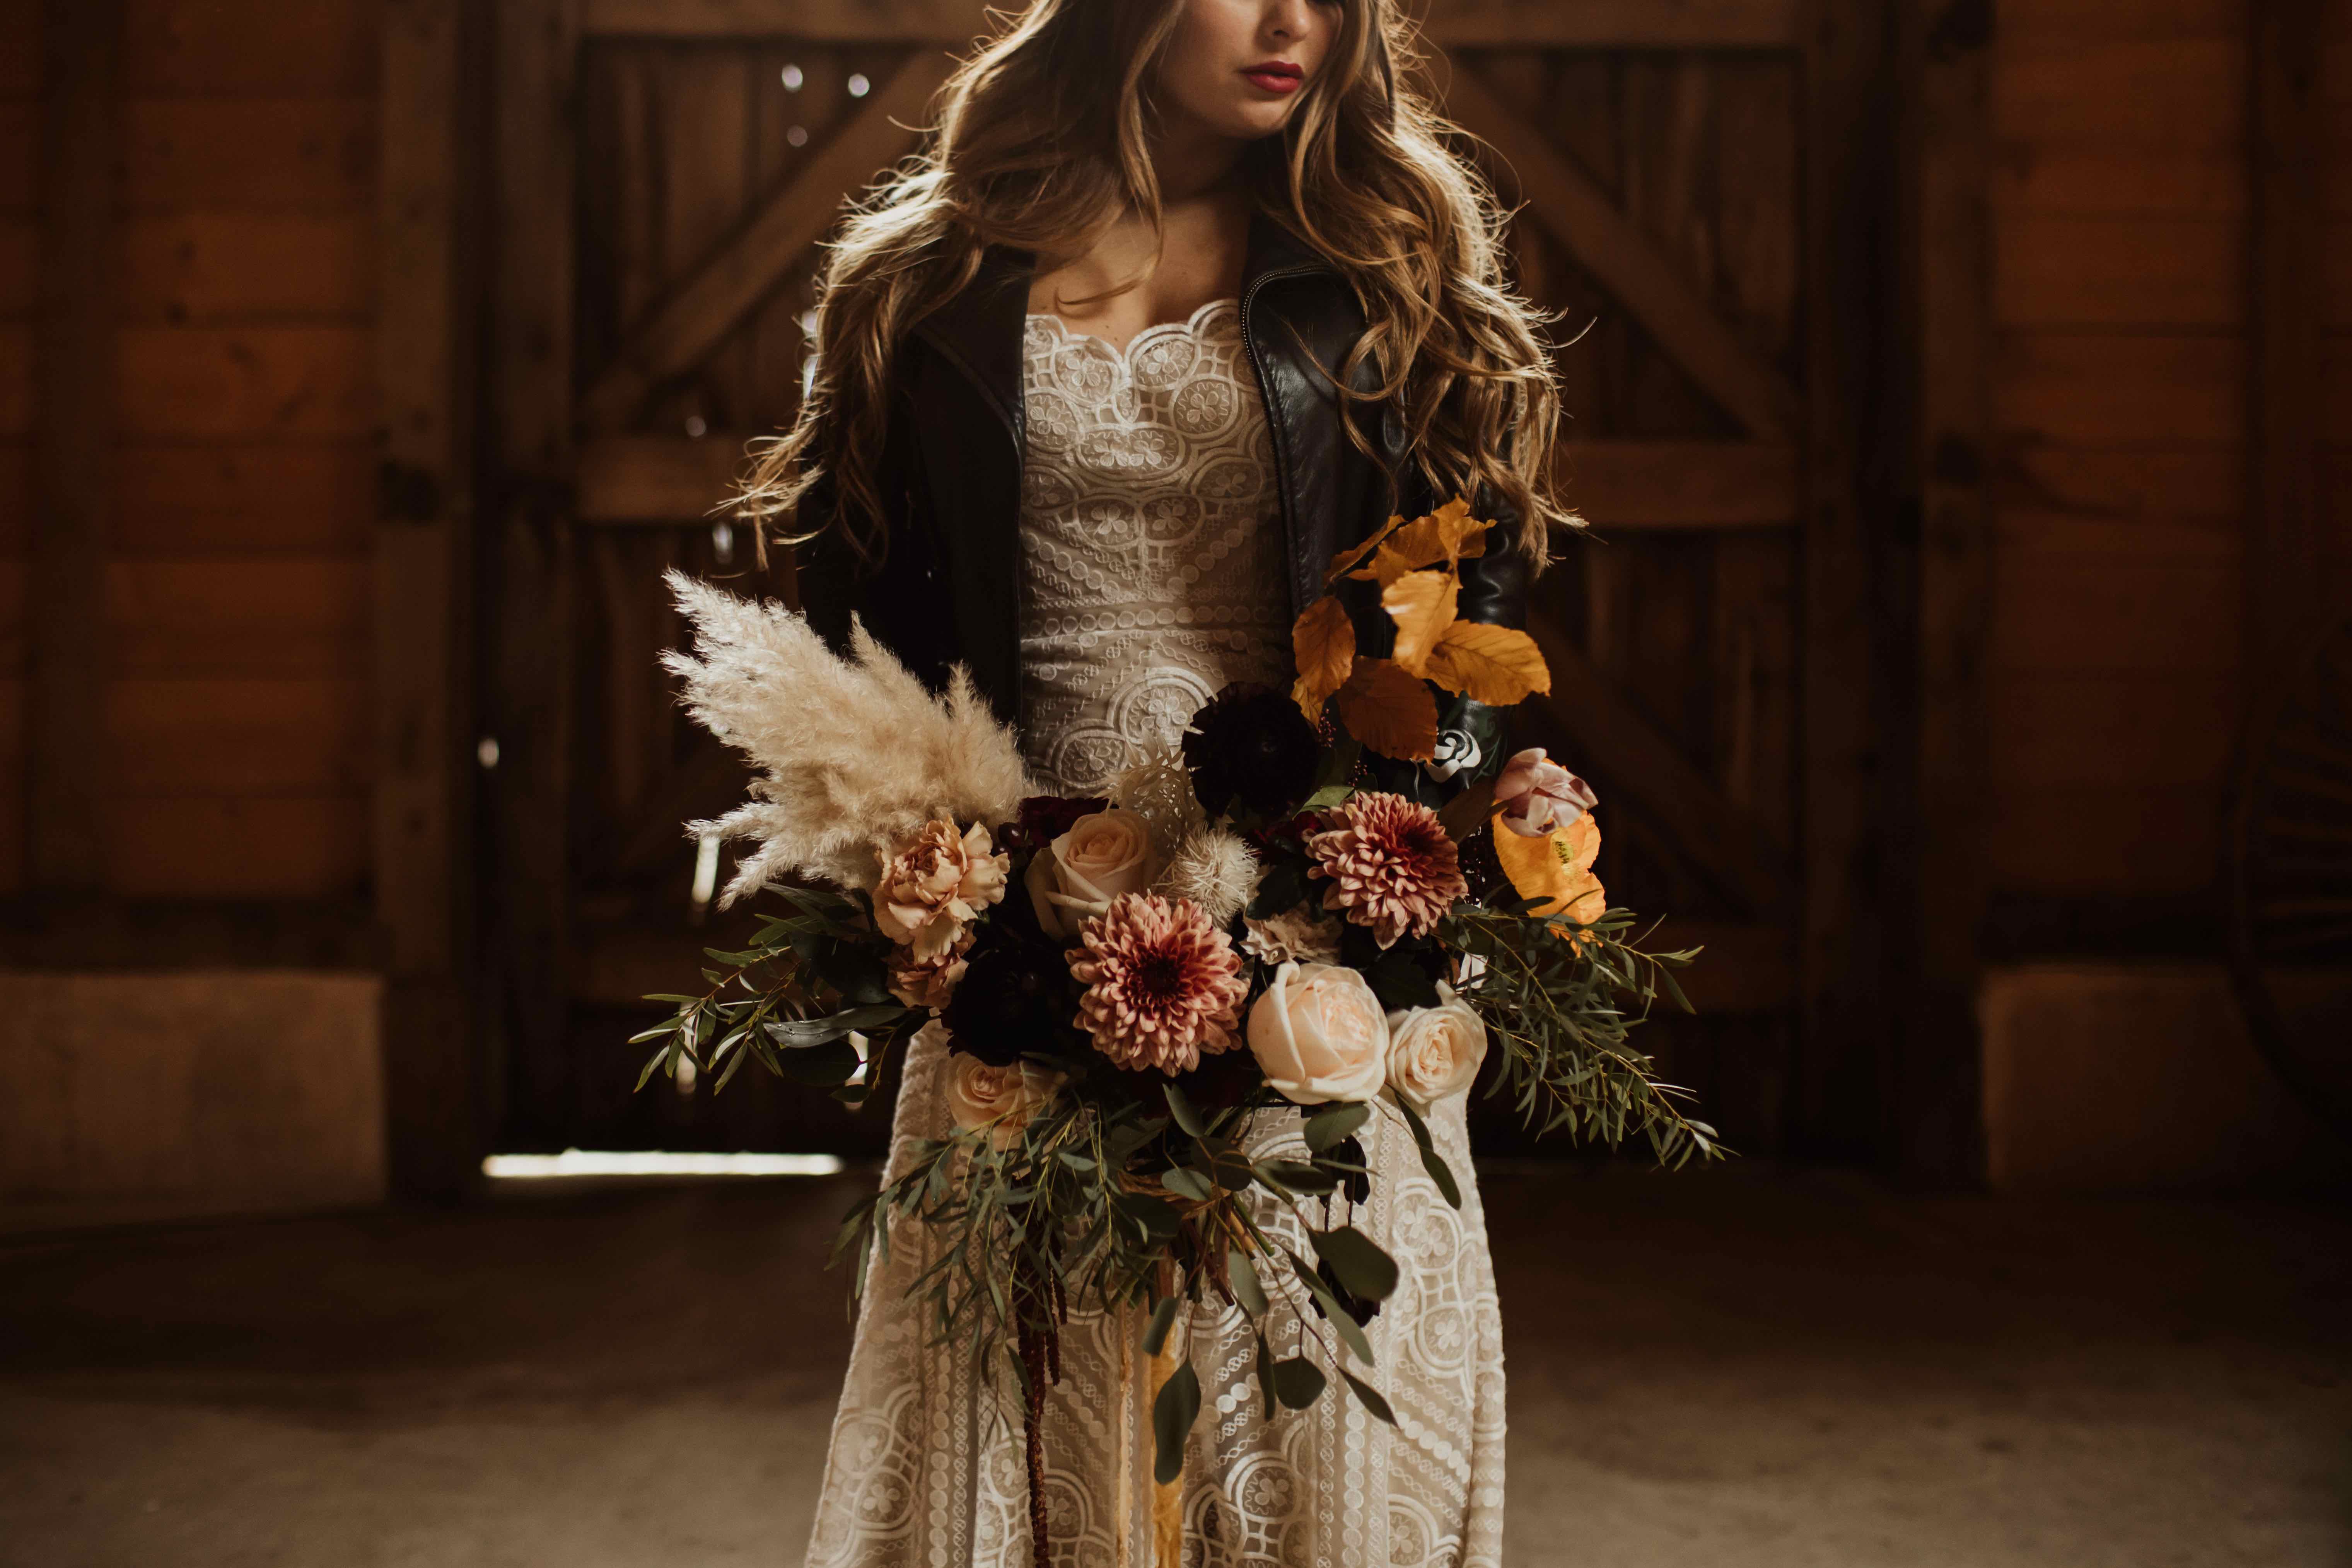 Beautiful portrait of this cool confident boho bride | Flowers by Iris & Co